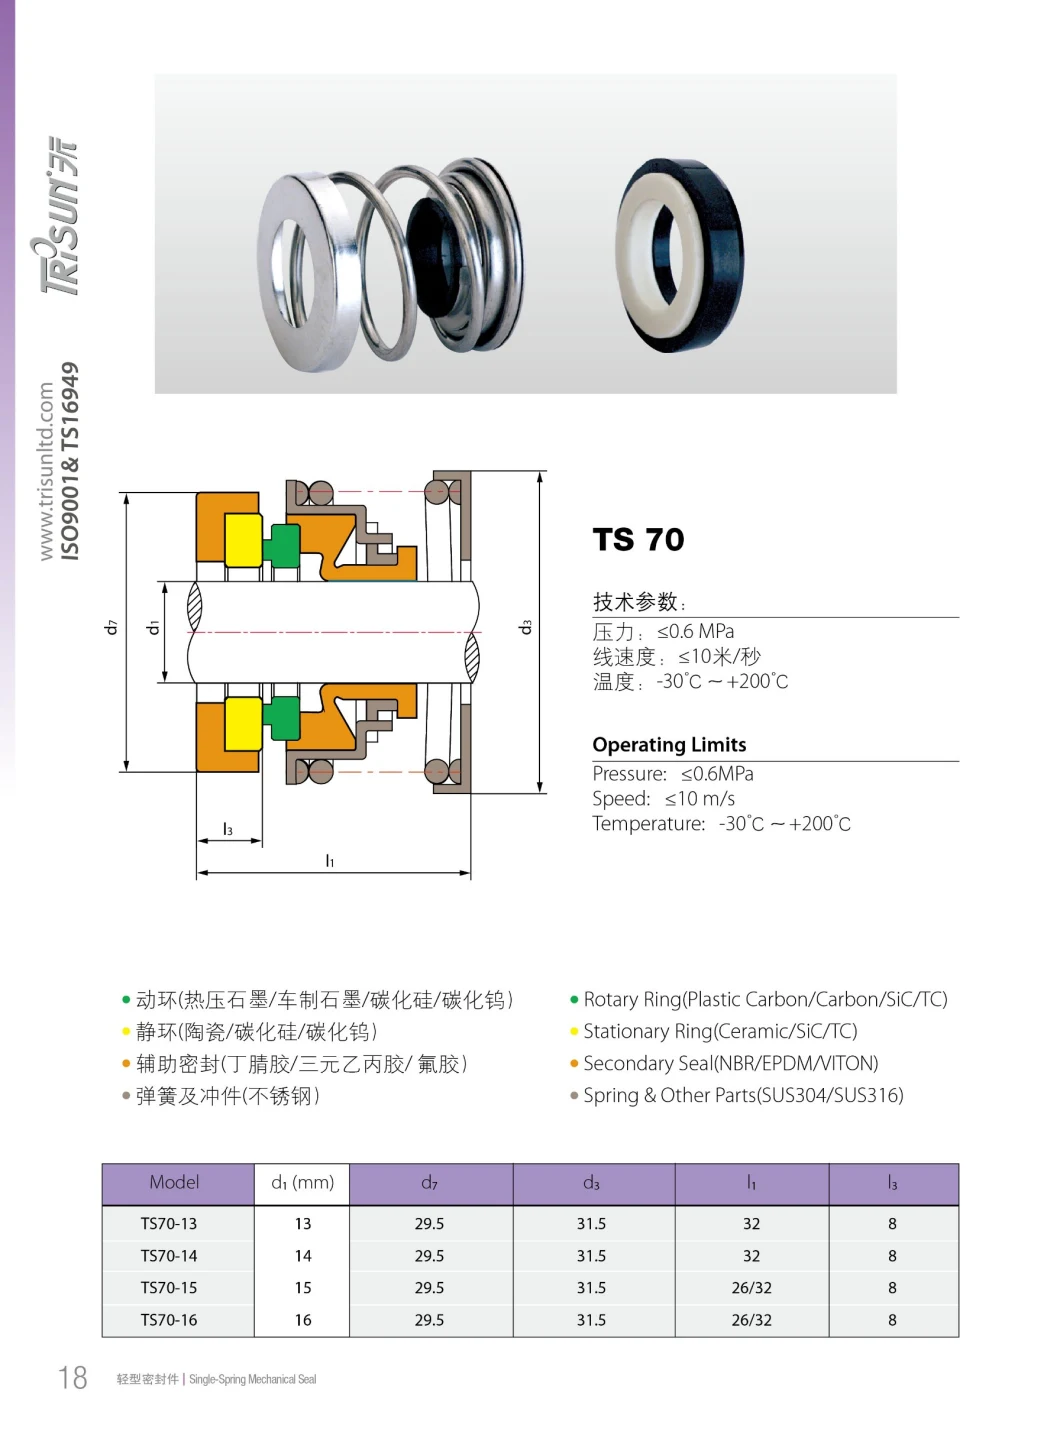 Mechanical Seal for Submersible Motor and Submersible Pump